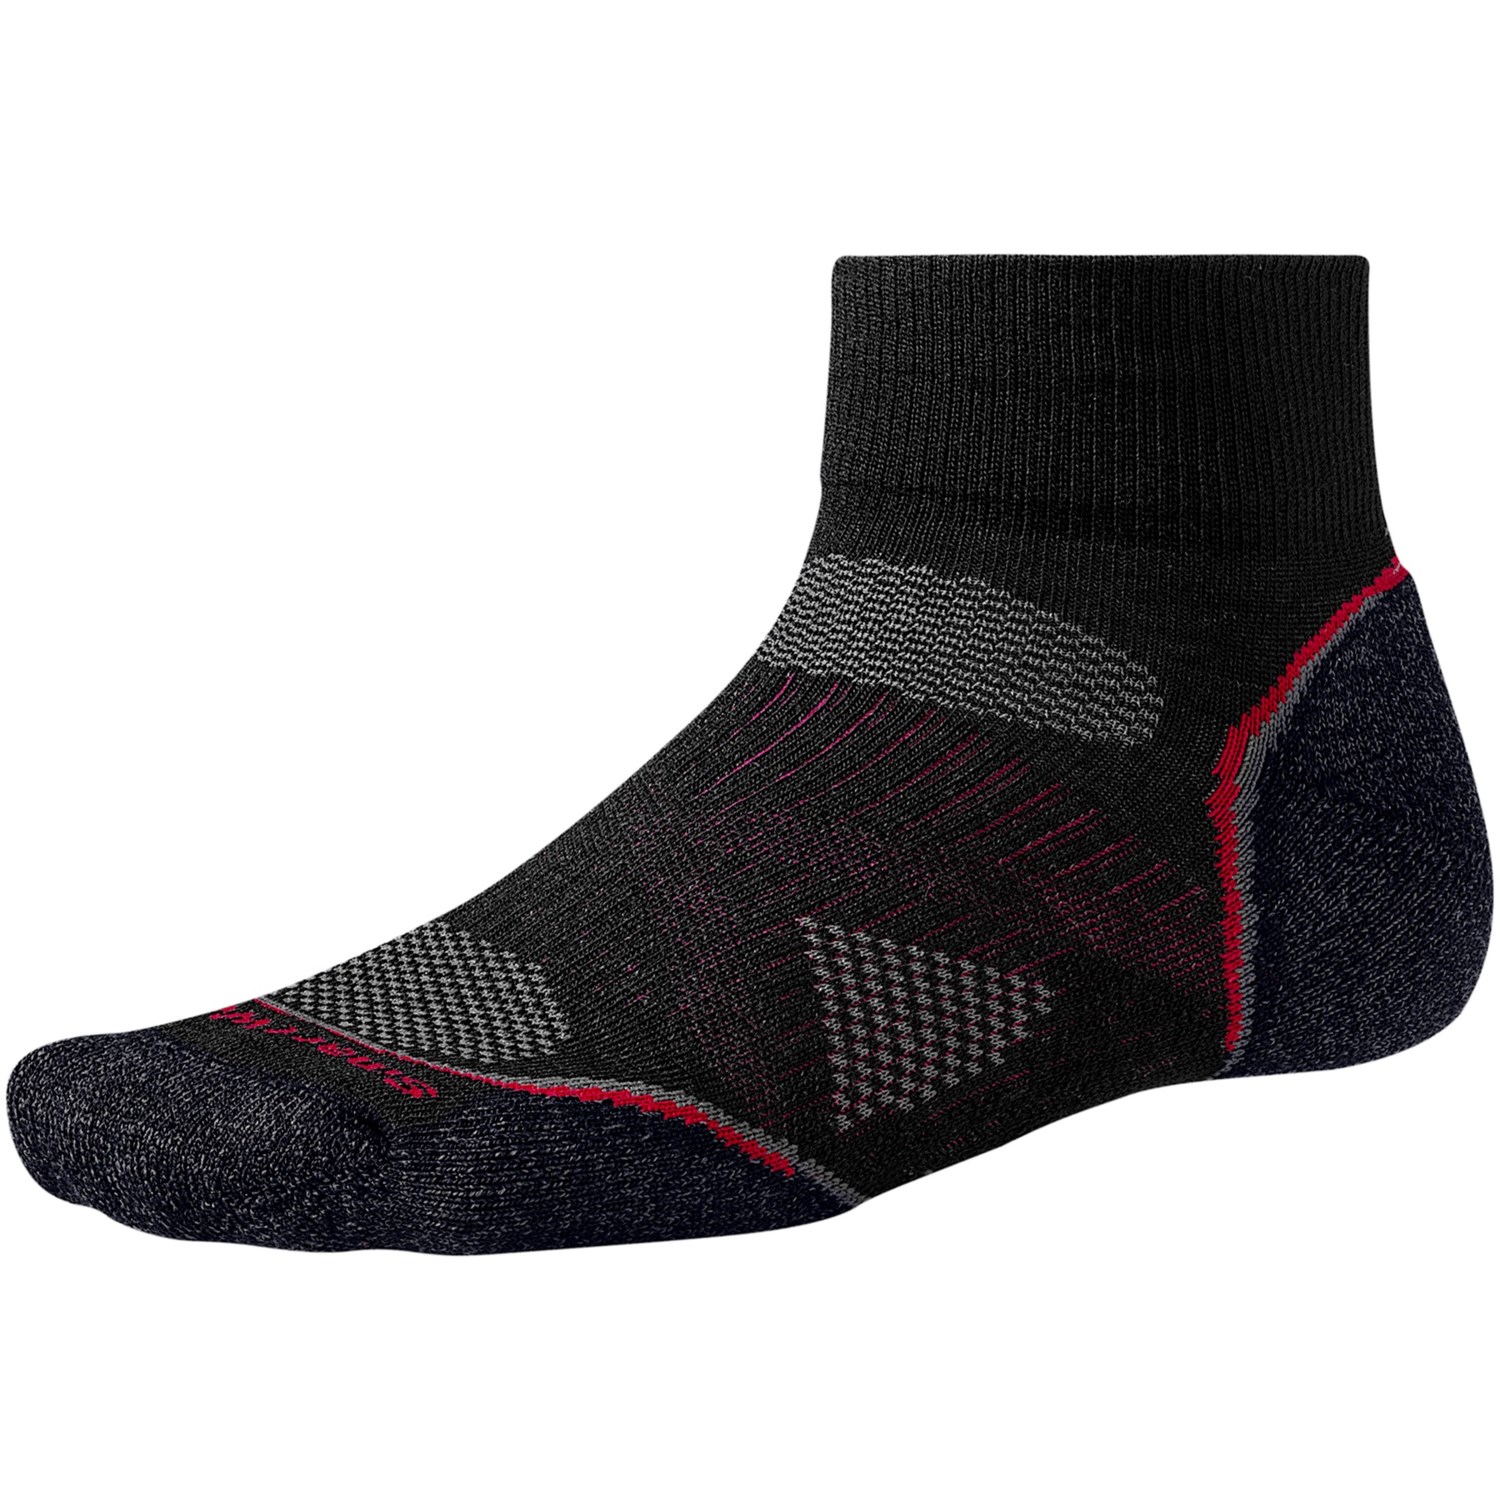 SmartWool 2013 PhD Cycle Light Socks (For Men and Women) 6250A